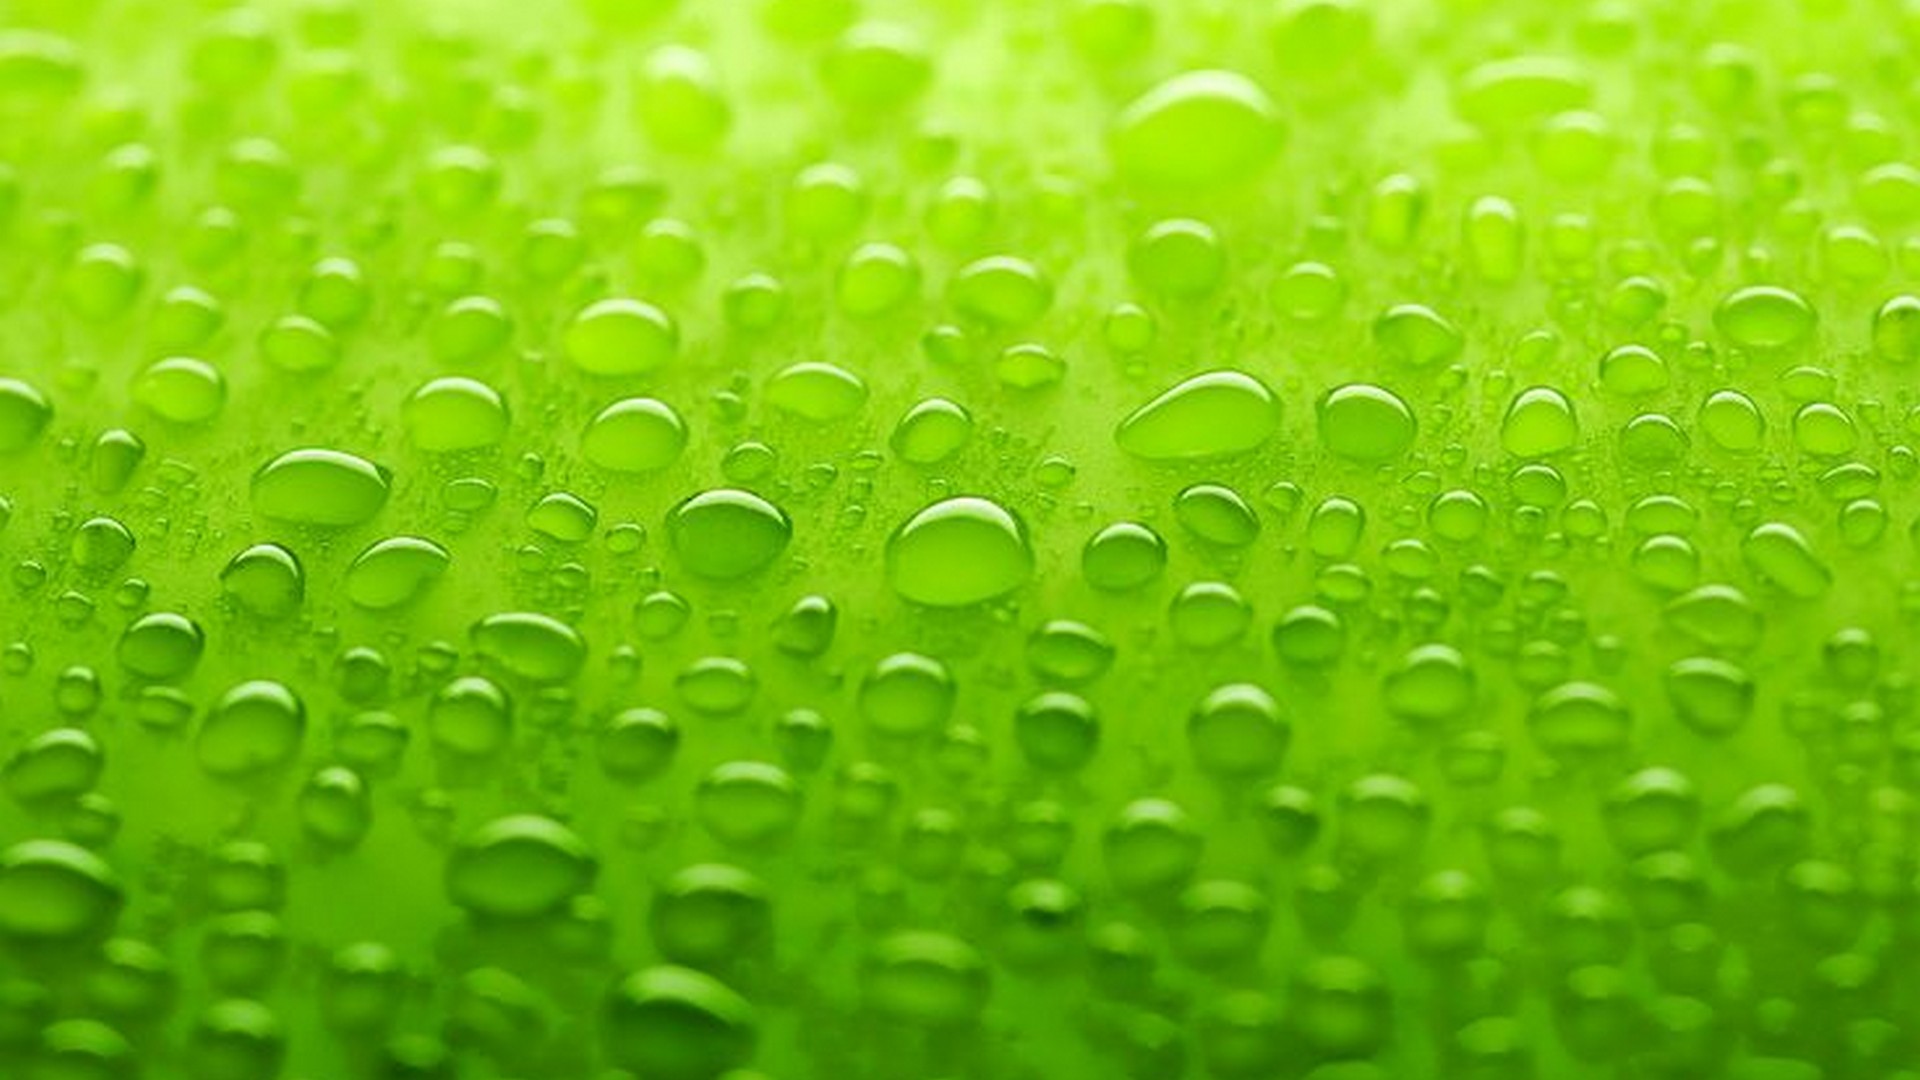 HD Lime Green Backgrounds with image resolution 1920x1080 pixel. You can use this wallpaper as background for your desktop Computer Screensavers, Android or iPhone smartphones